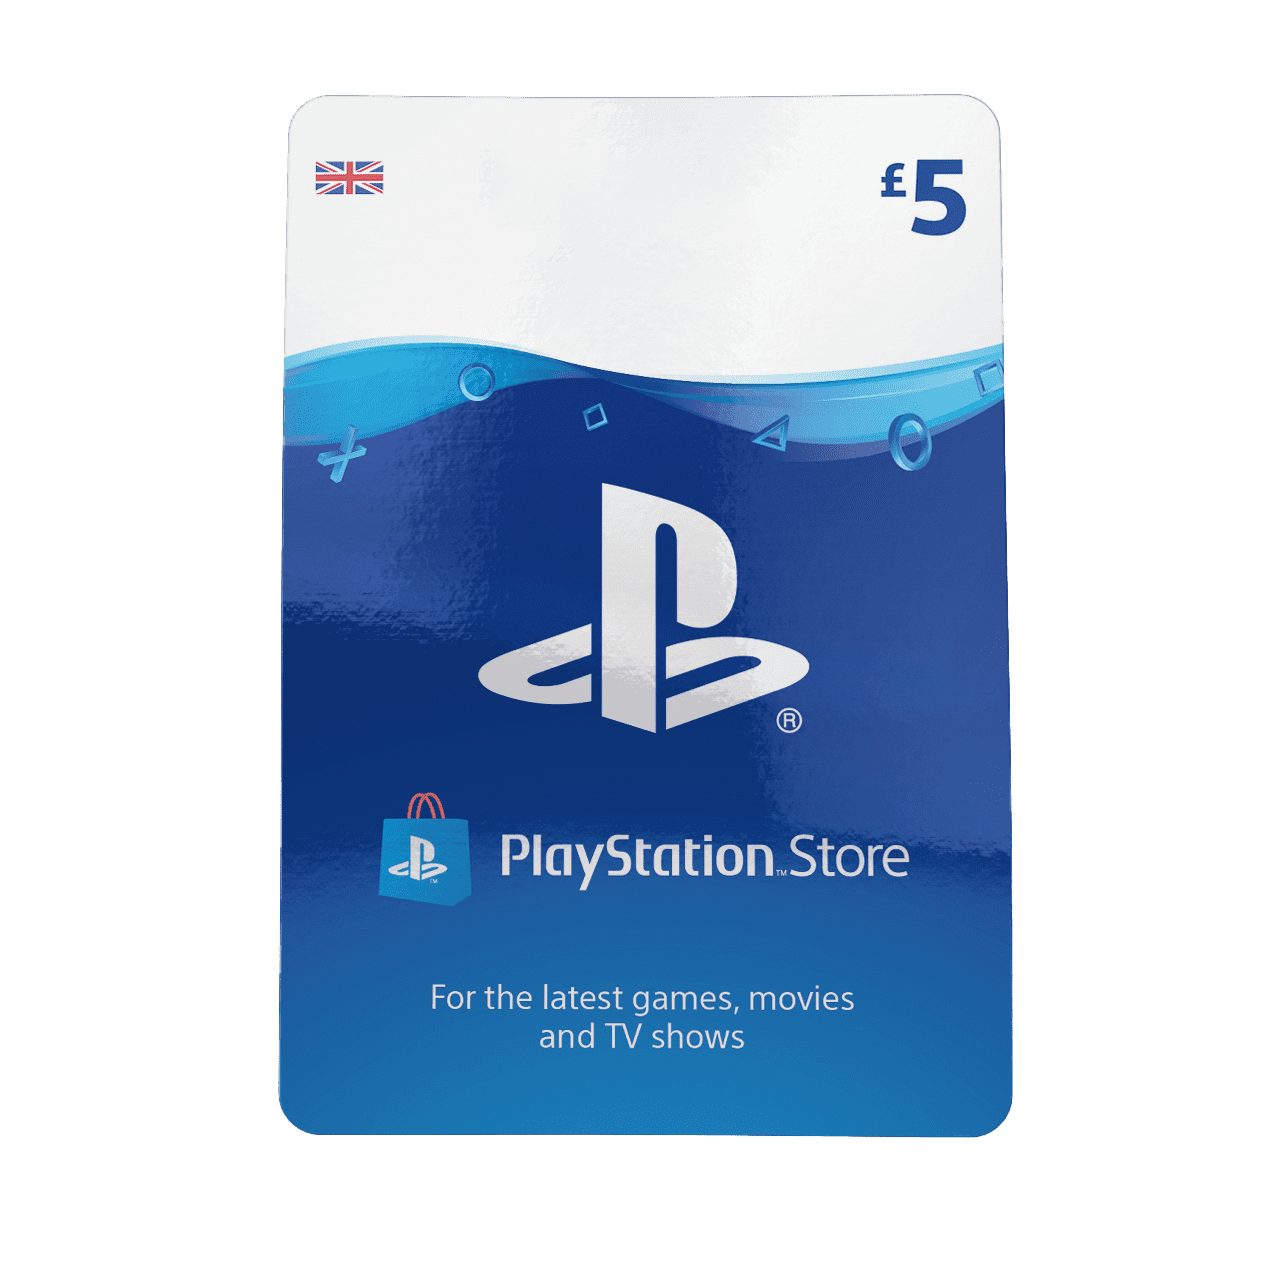 5 pound ps4 gift card